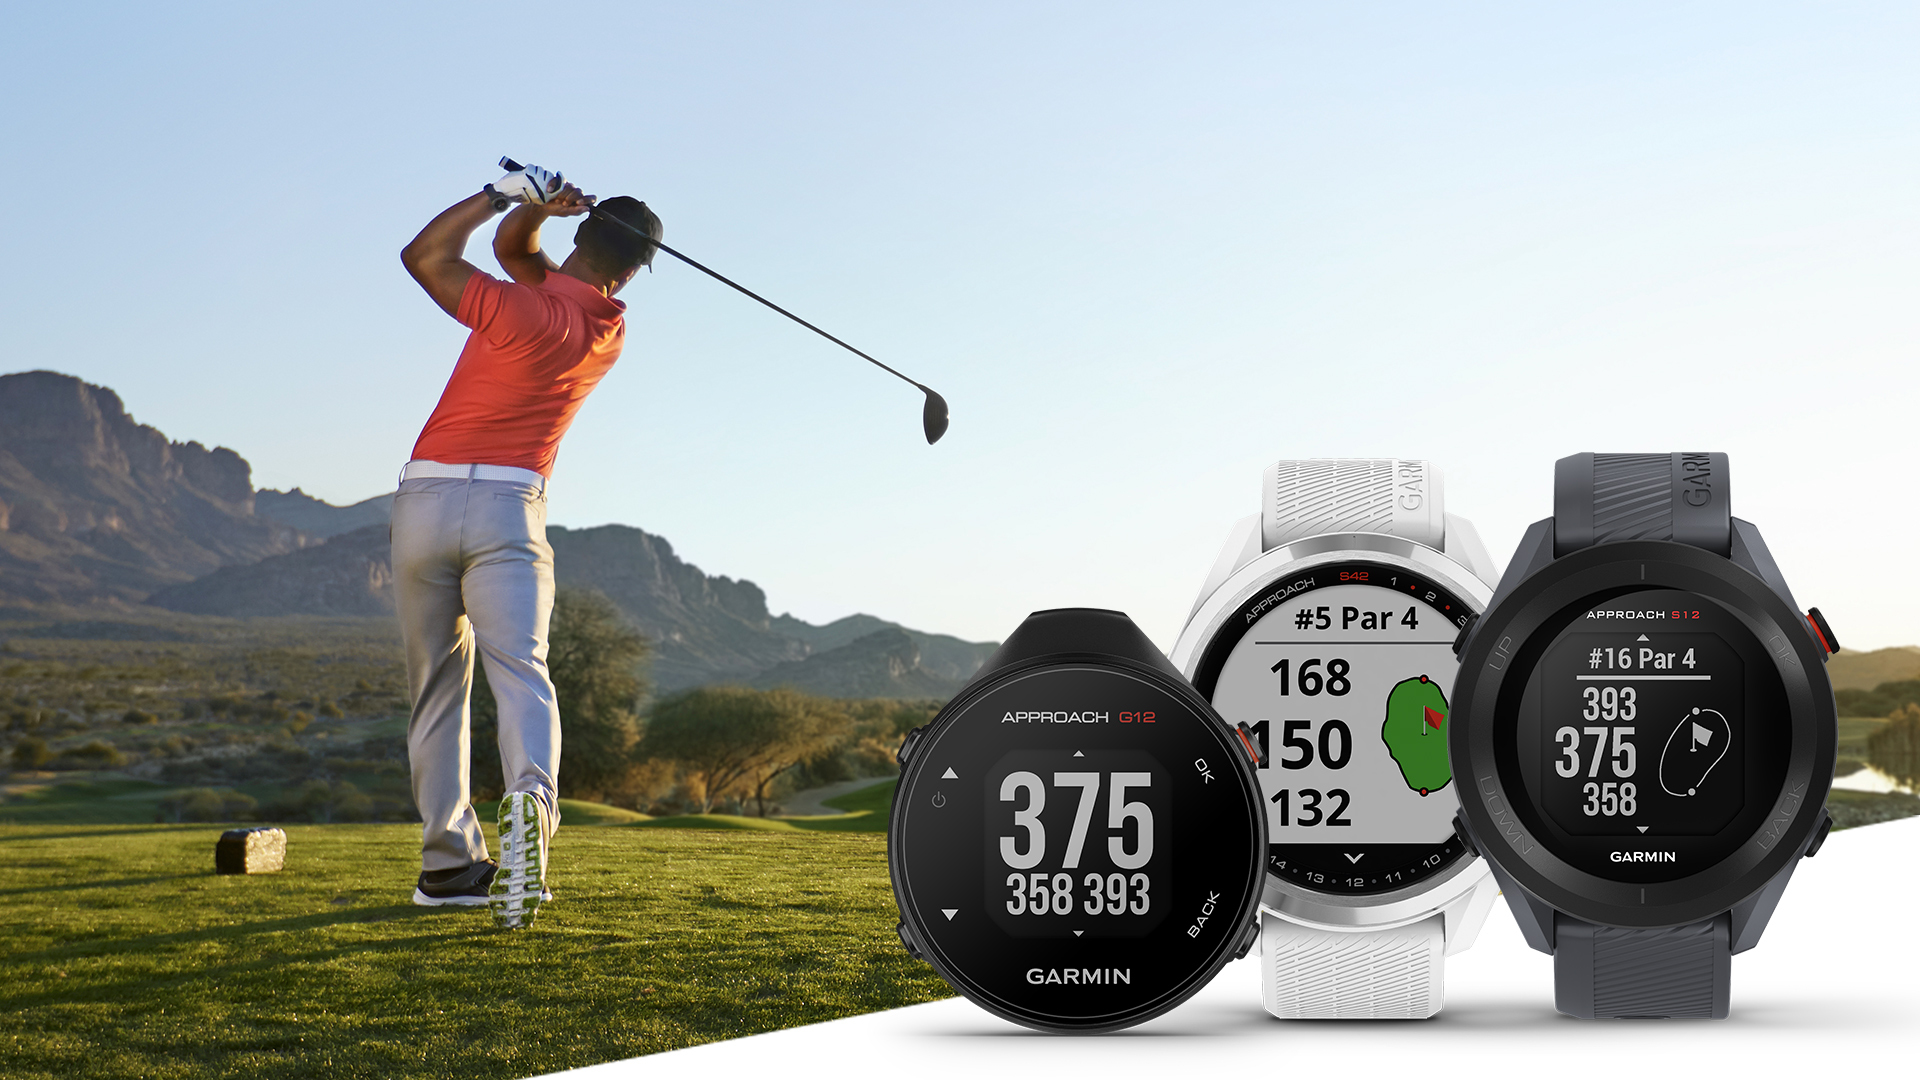 Garmin launches GPS devices to help golfers raise their game